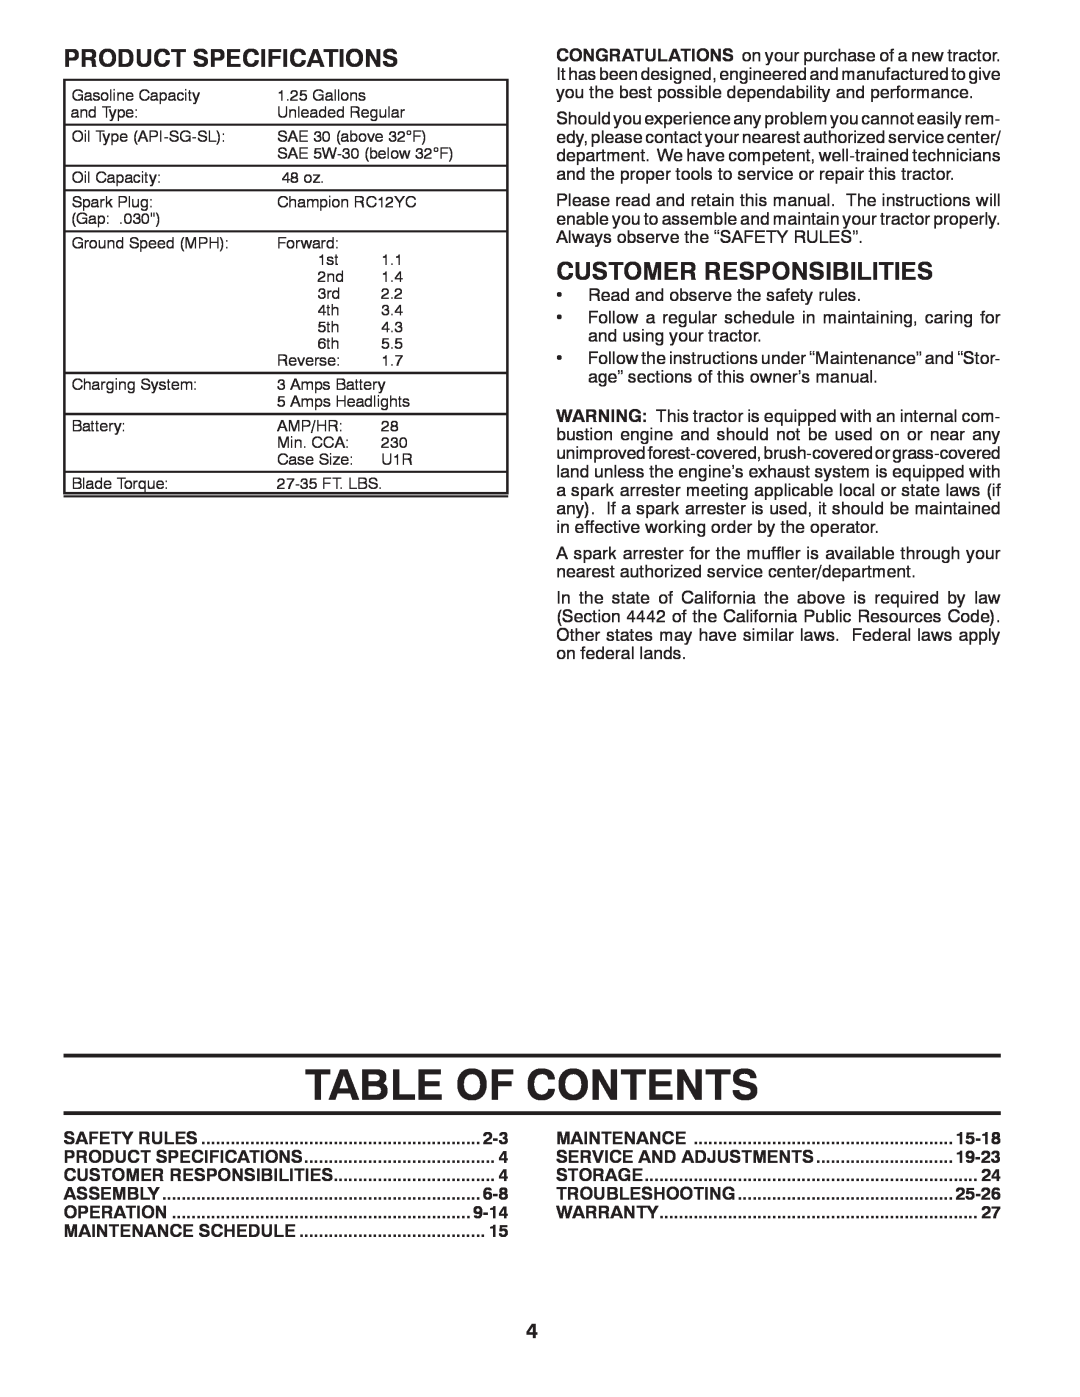 Murray 96017000500 manual Table Of Contents, Product Specifications, Customer Responsibilities 